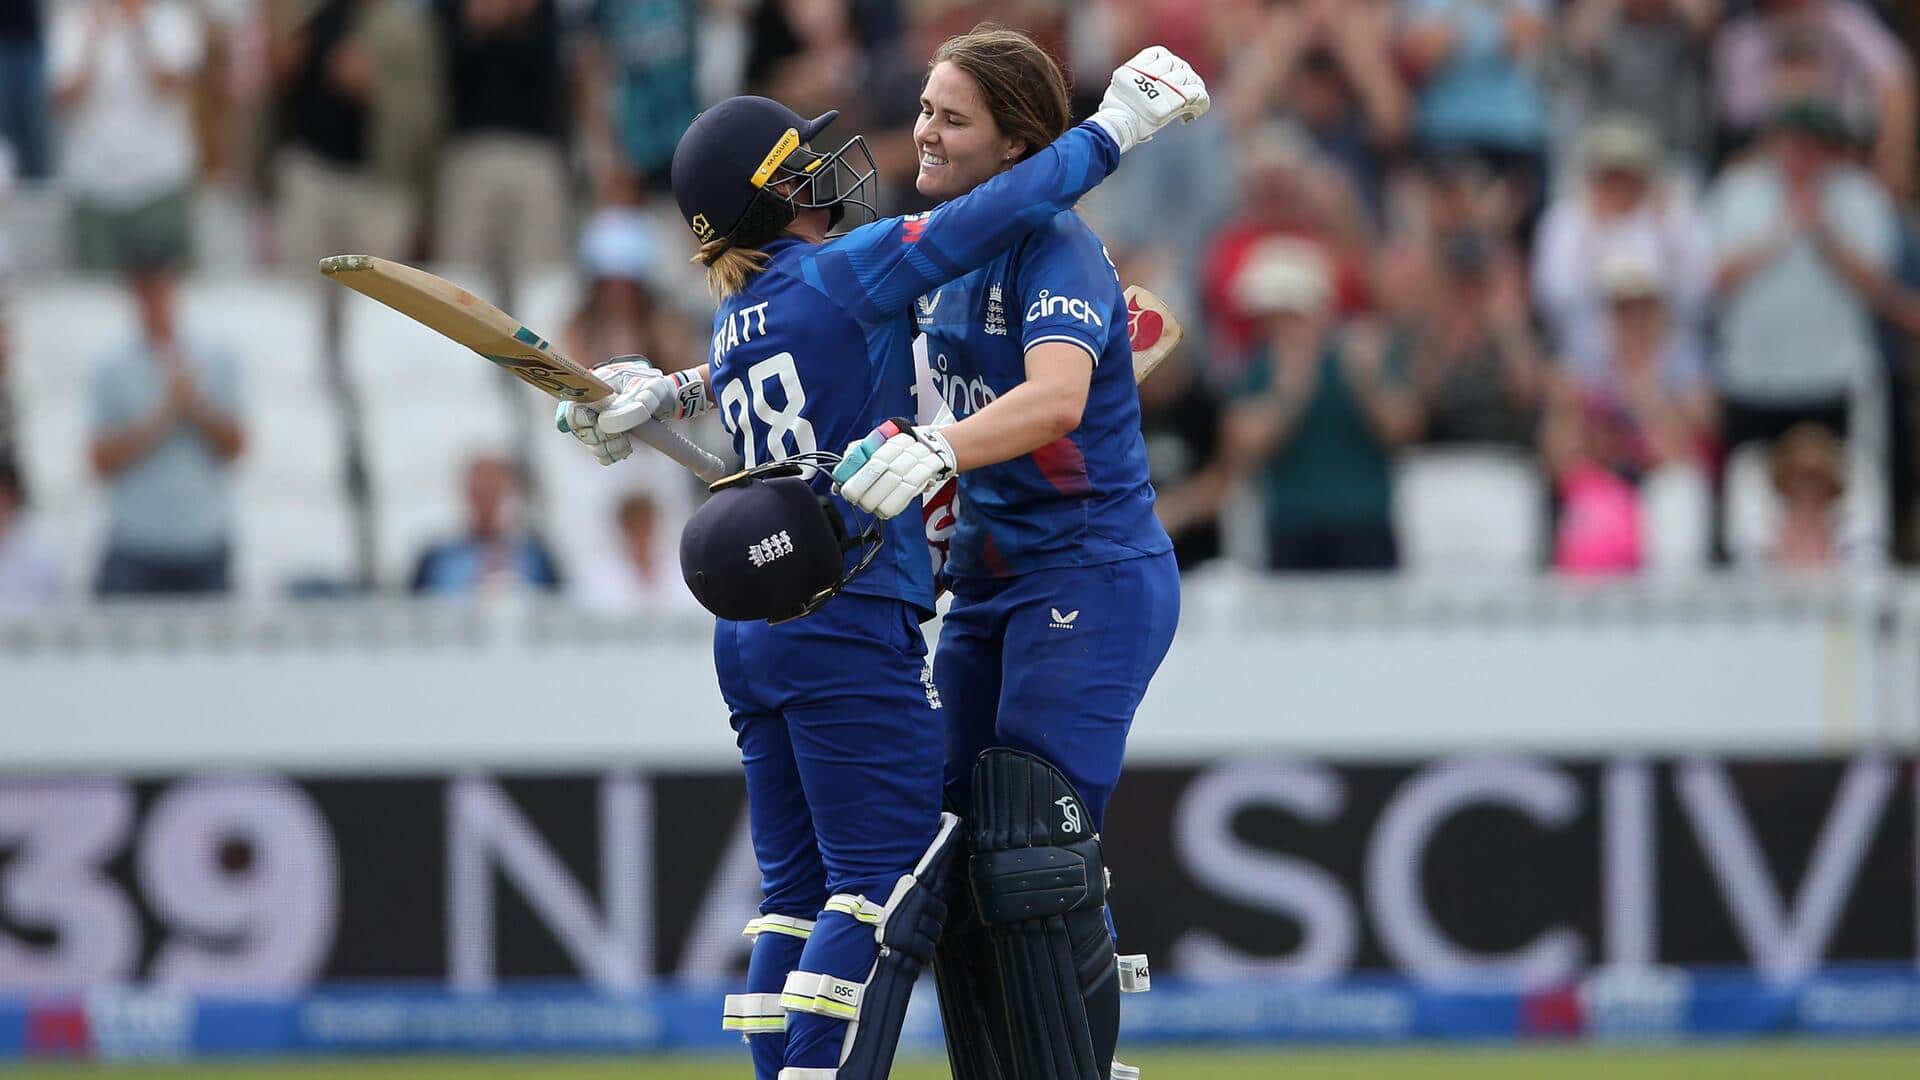 Sciver-Brunt becomes second England player to slam consecutive WODI centuries